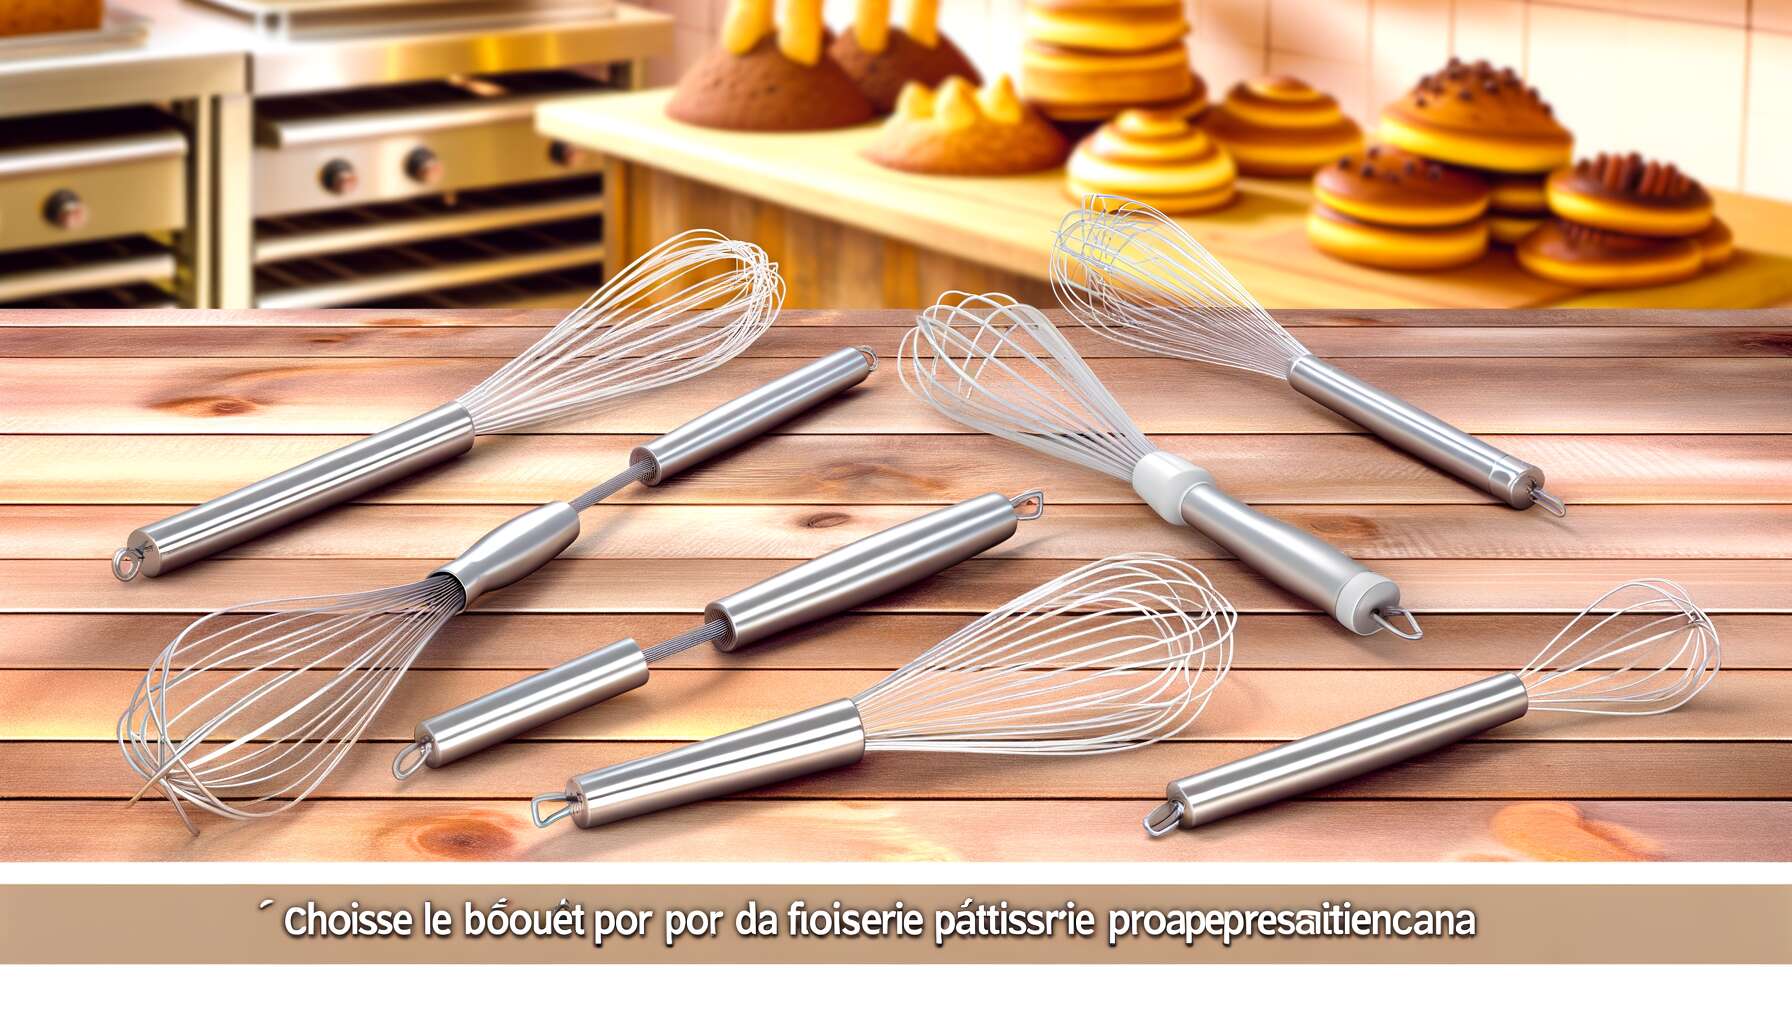 Fouet Patisserie, Fouets En Silicone, Fouets Cuisine, Fouet